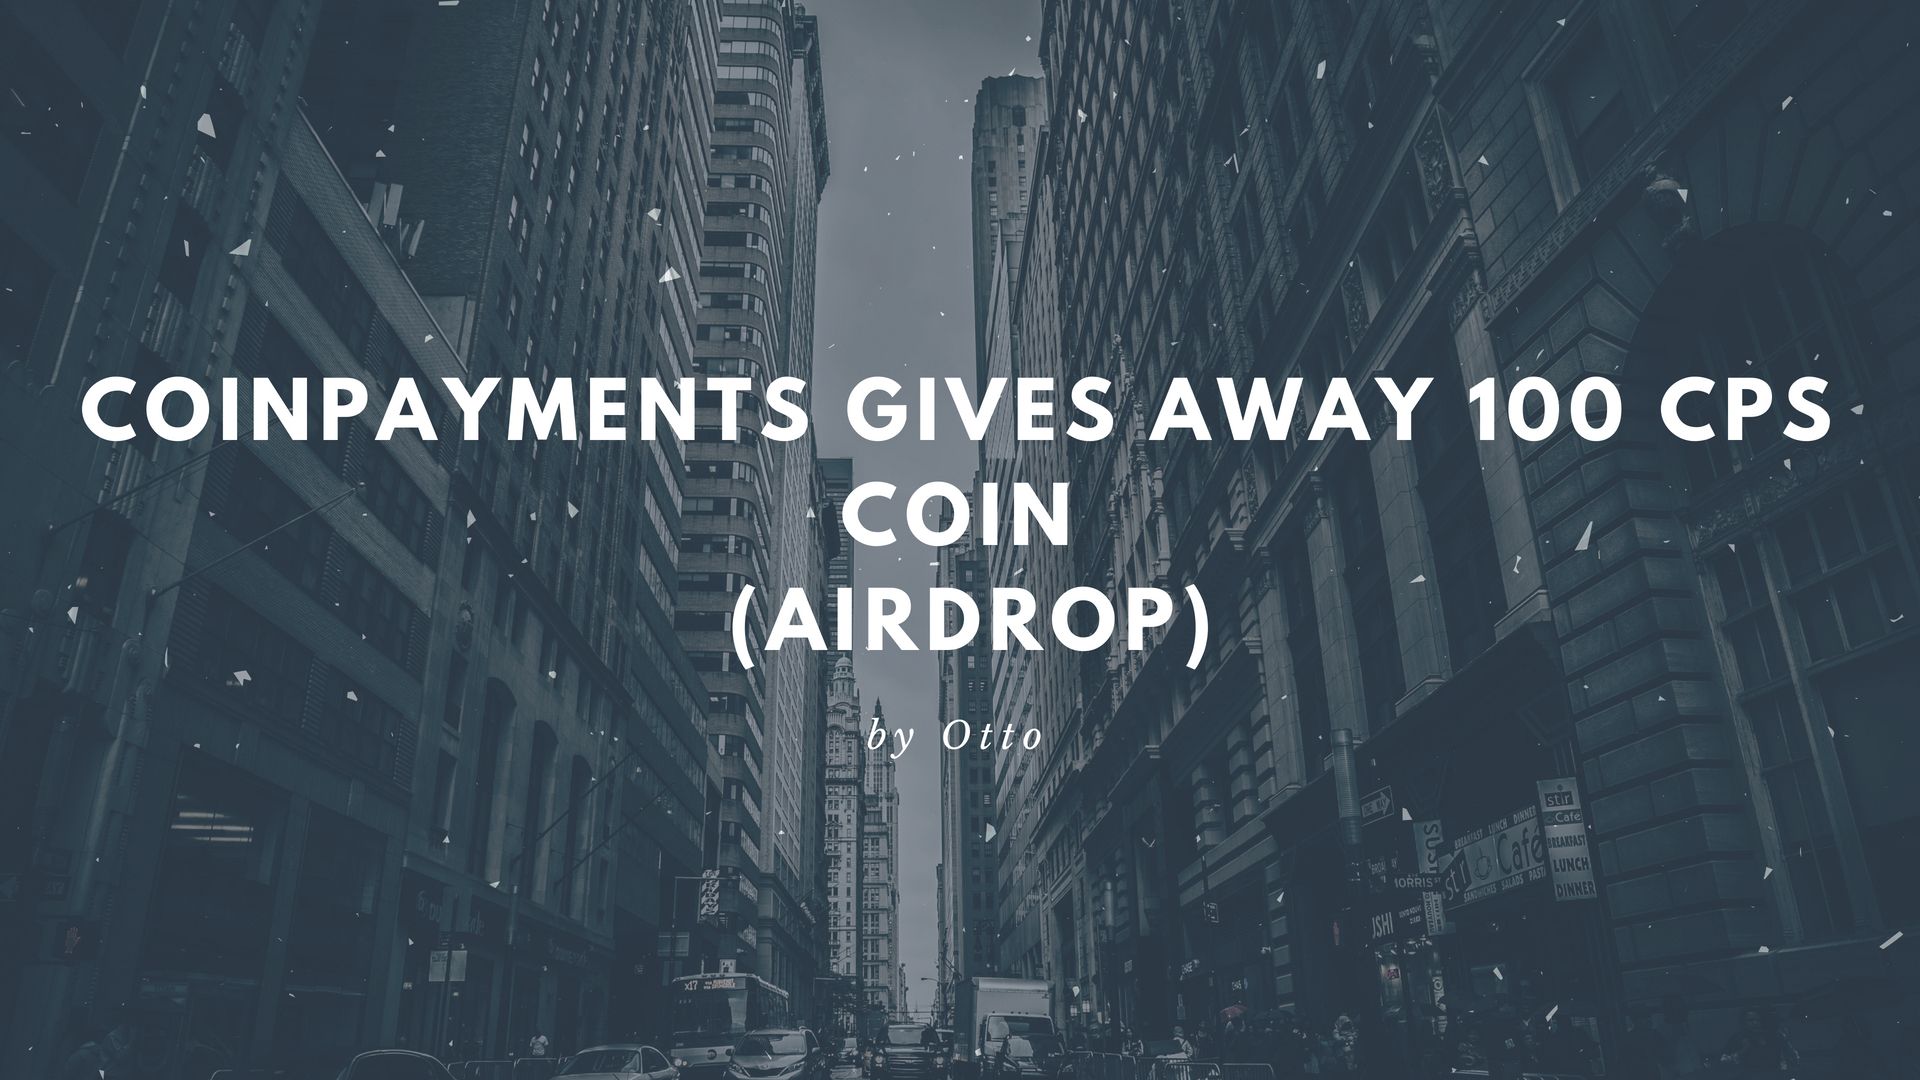 CoinPayments gives away 100 CPS Coin (Airdrop).jpg